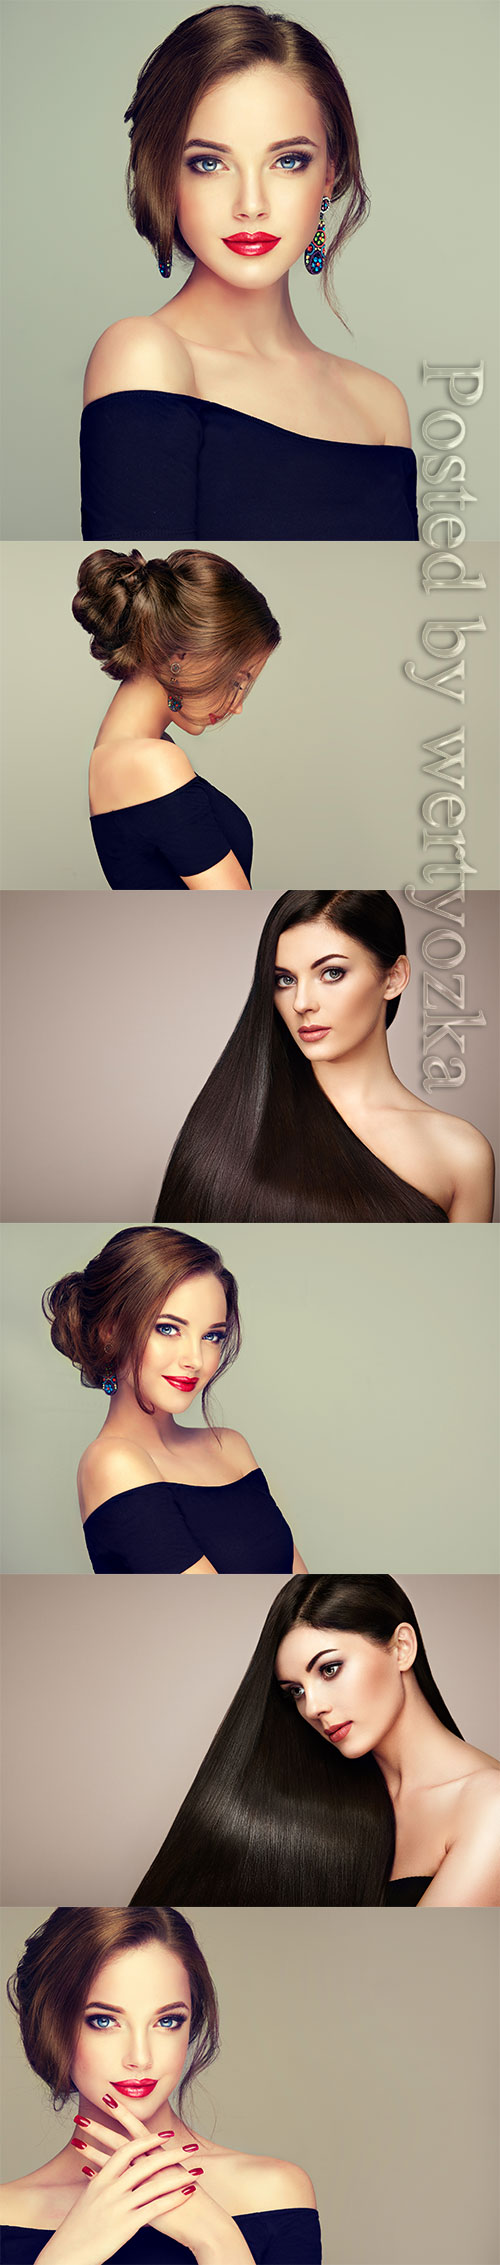 Luxurious girls with beautiful hairstyles and makeup stock photo